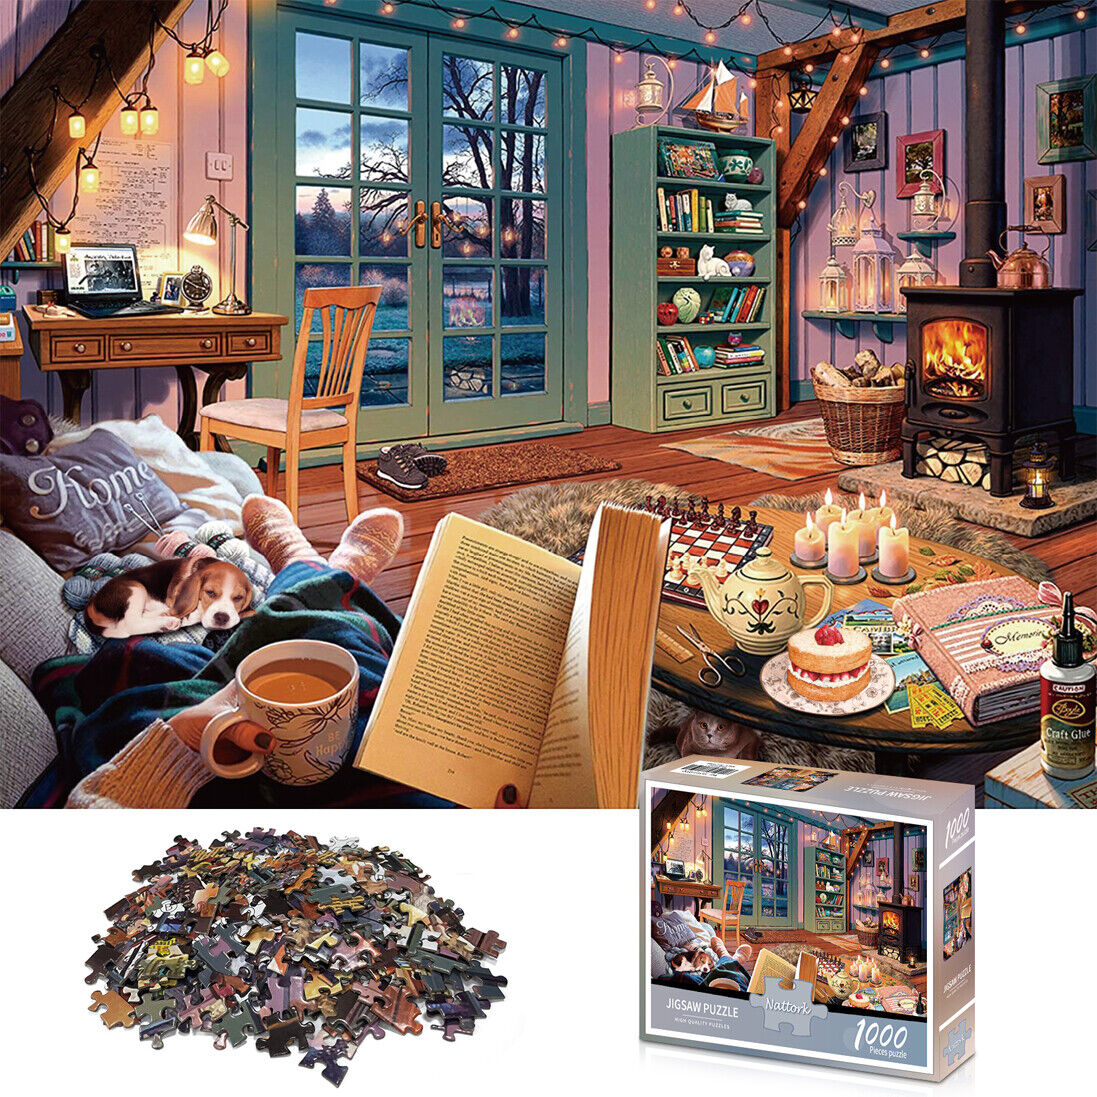 Nattork Home Jigsaw Puzzles 1000 Piece for Adults Kids Toys Fun Holiday Gift